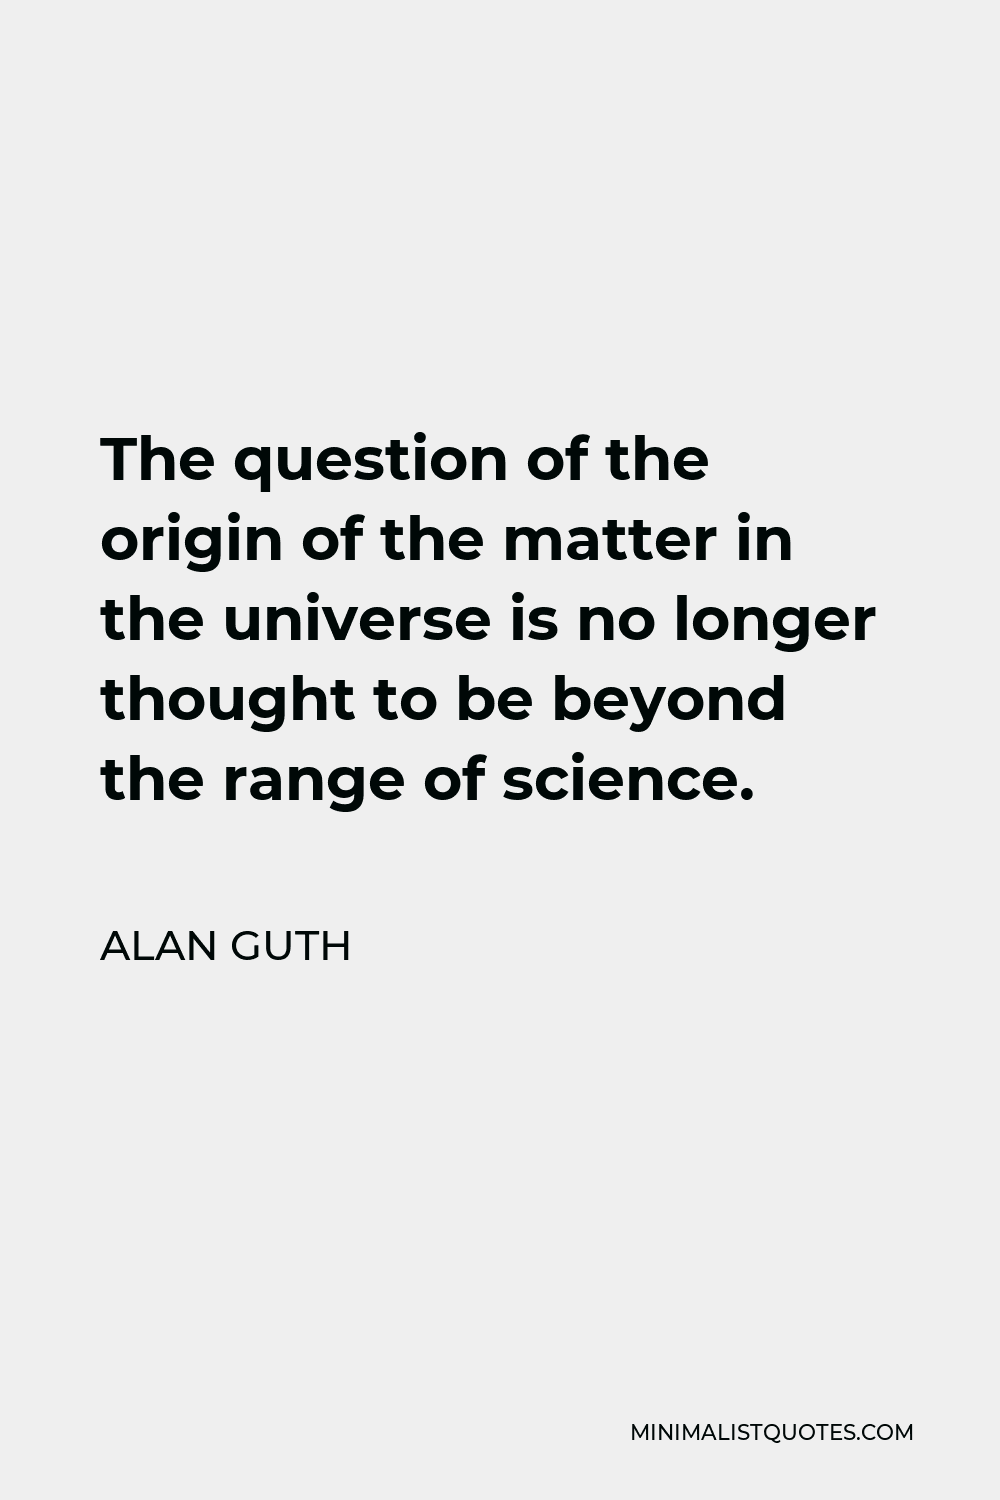 Alan Guth Quote - The question of the origin of the matter in the universe is no longer thought to be beyond the range of science.